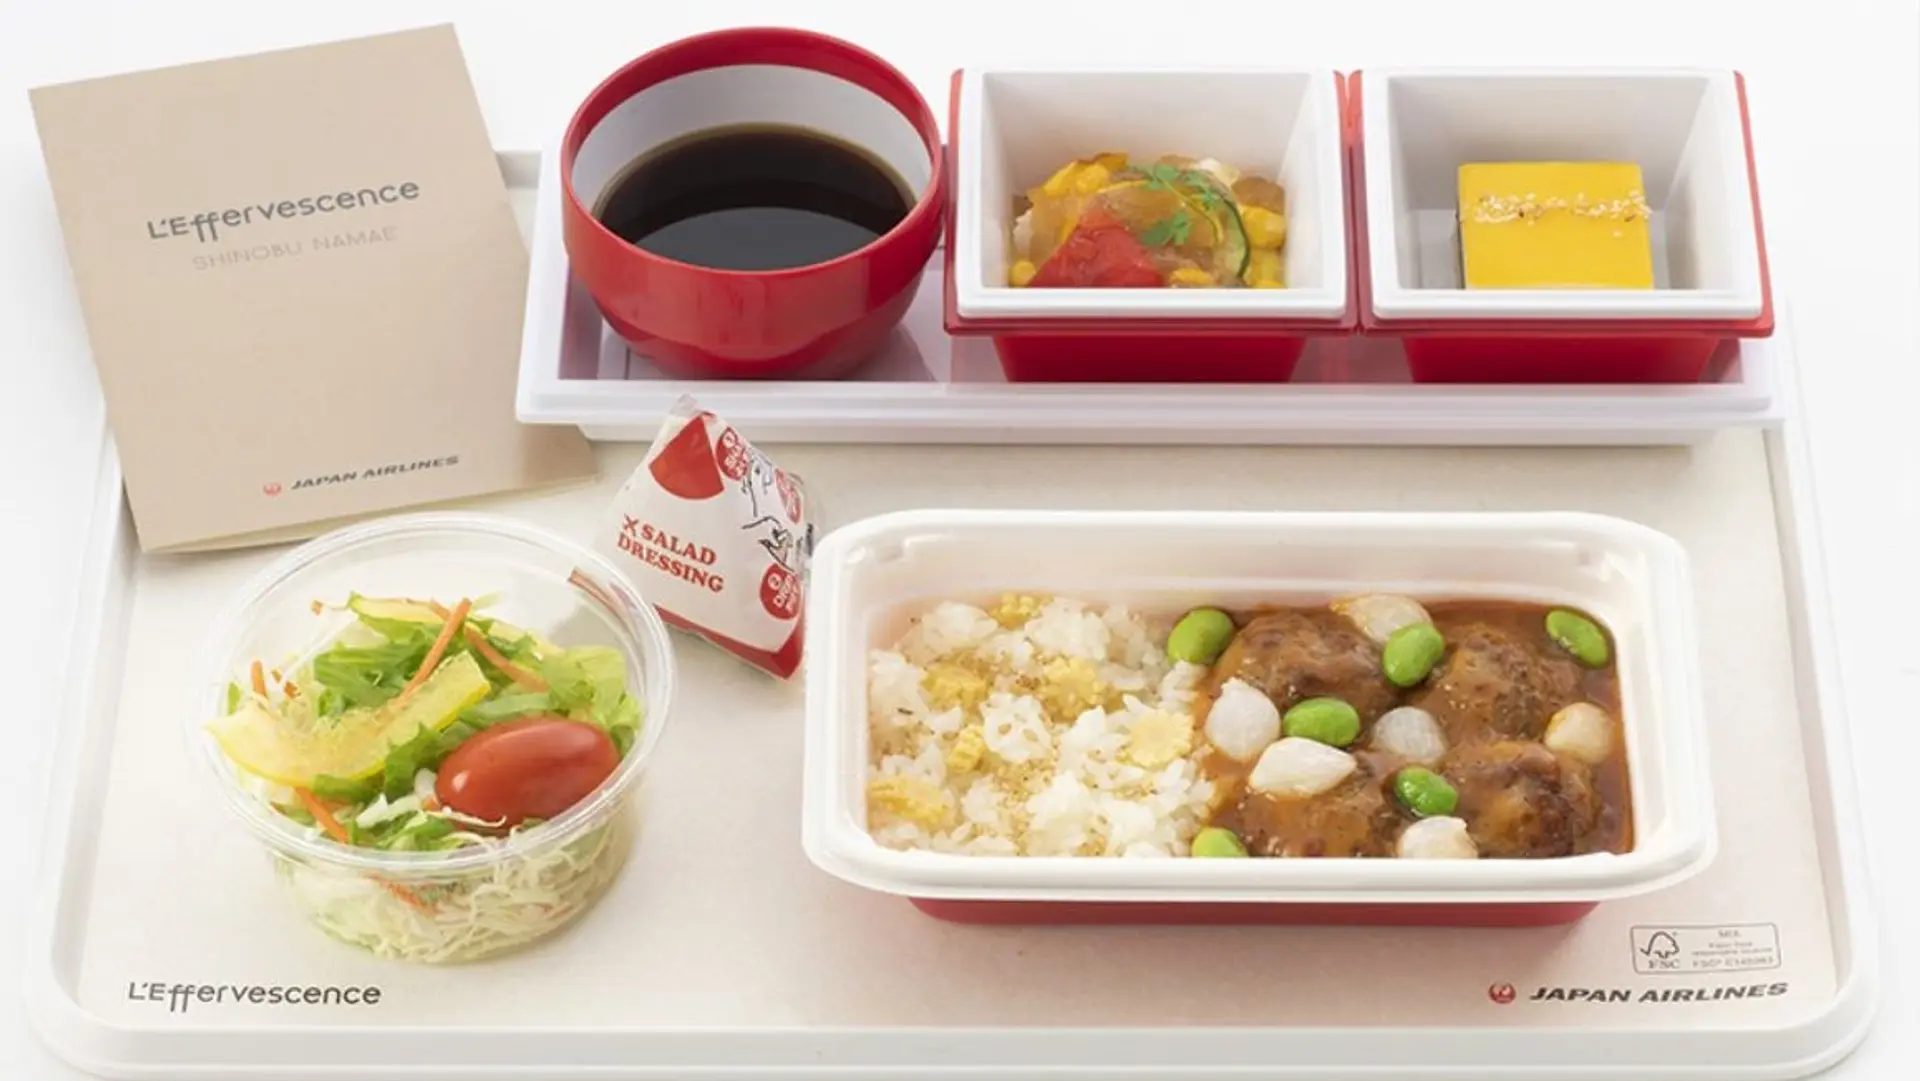 Airline review Cuisine - Japan Airlines - 6